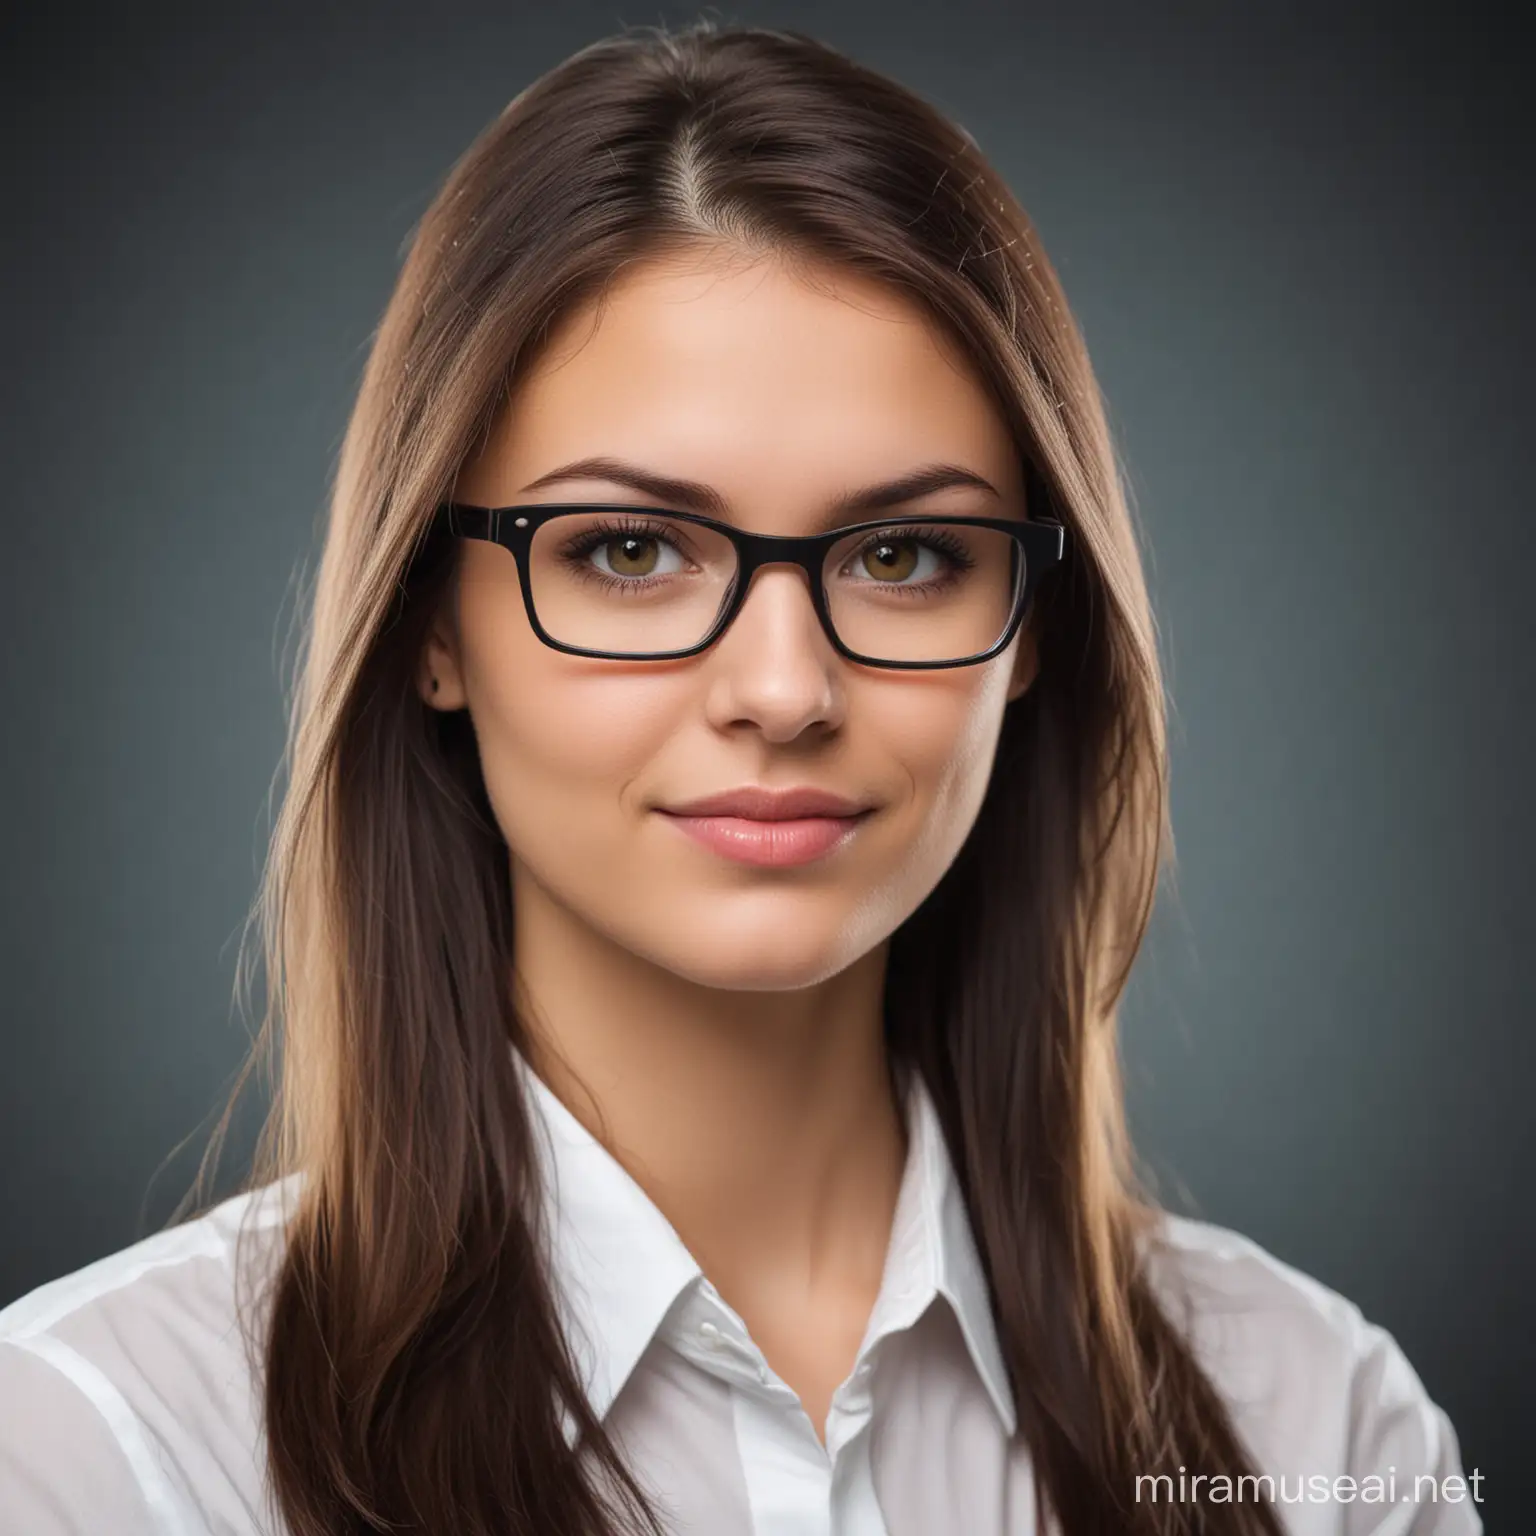 Professional Computer Software Engineer Young Lady in Glasses and Formal Attire